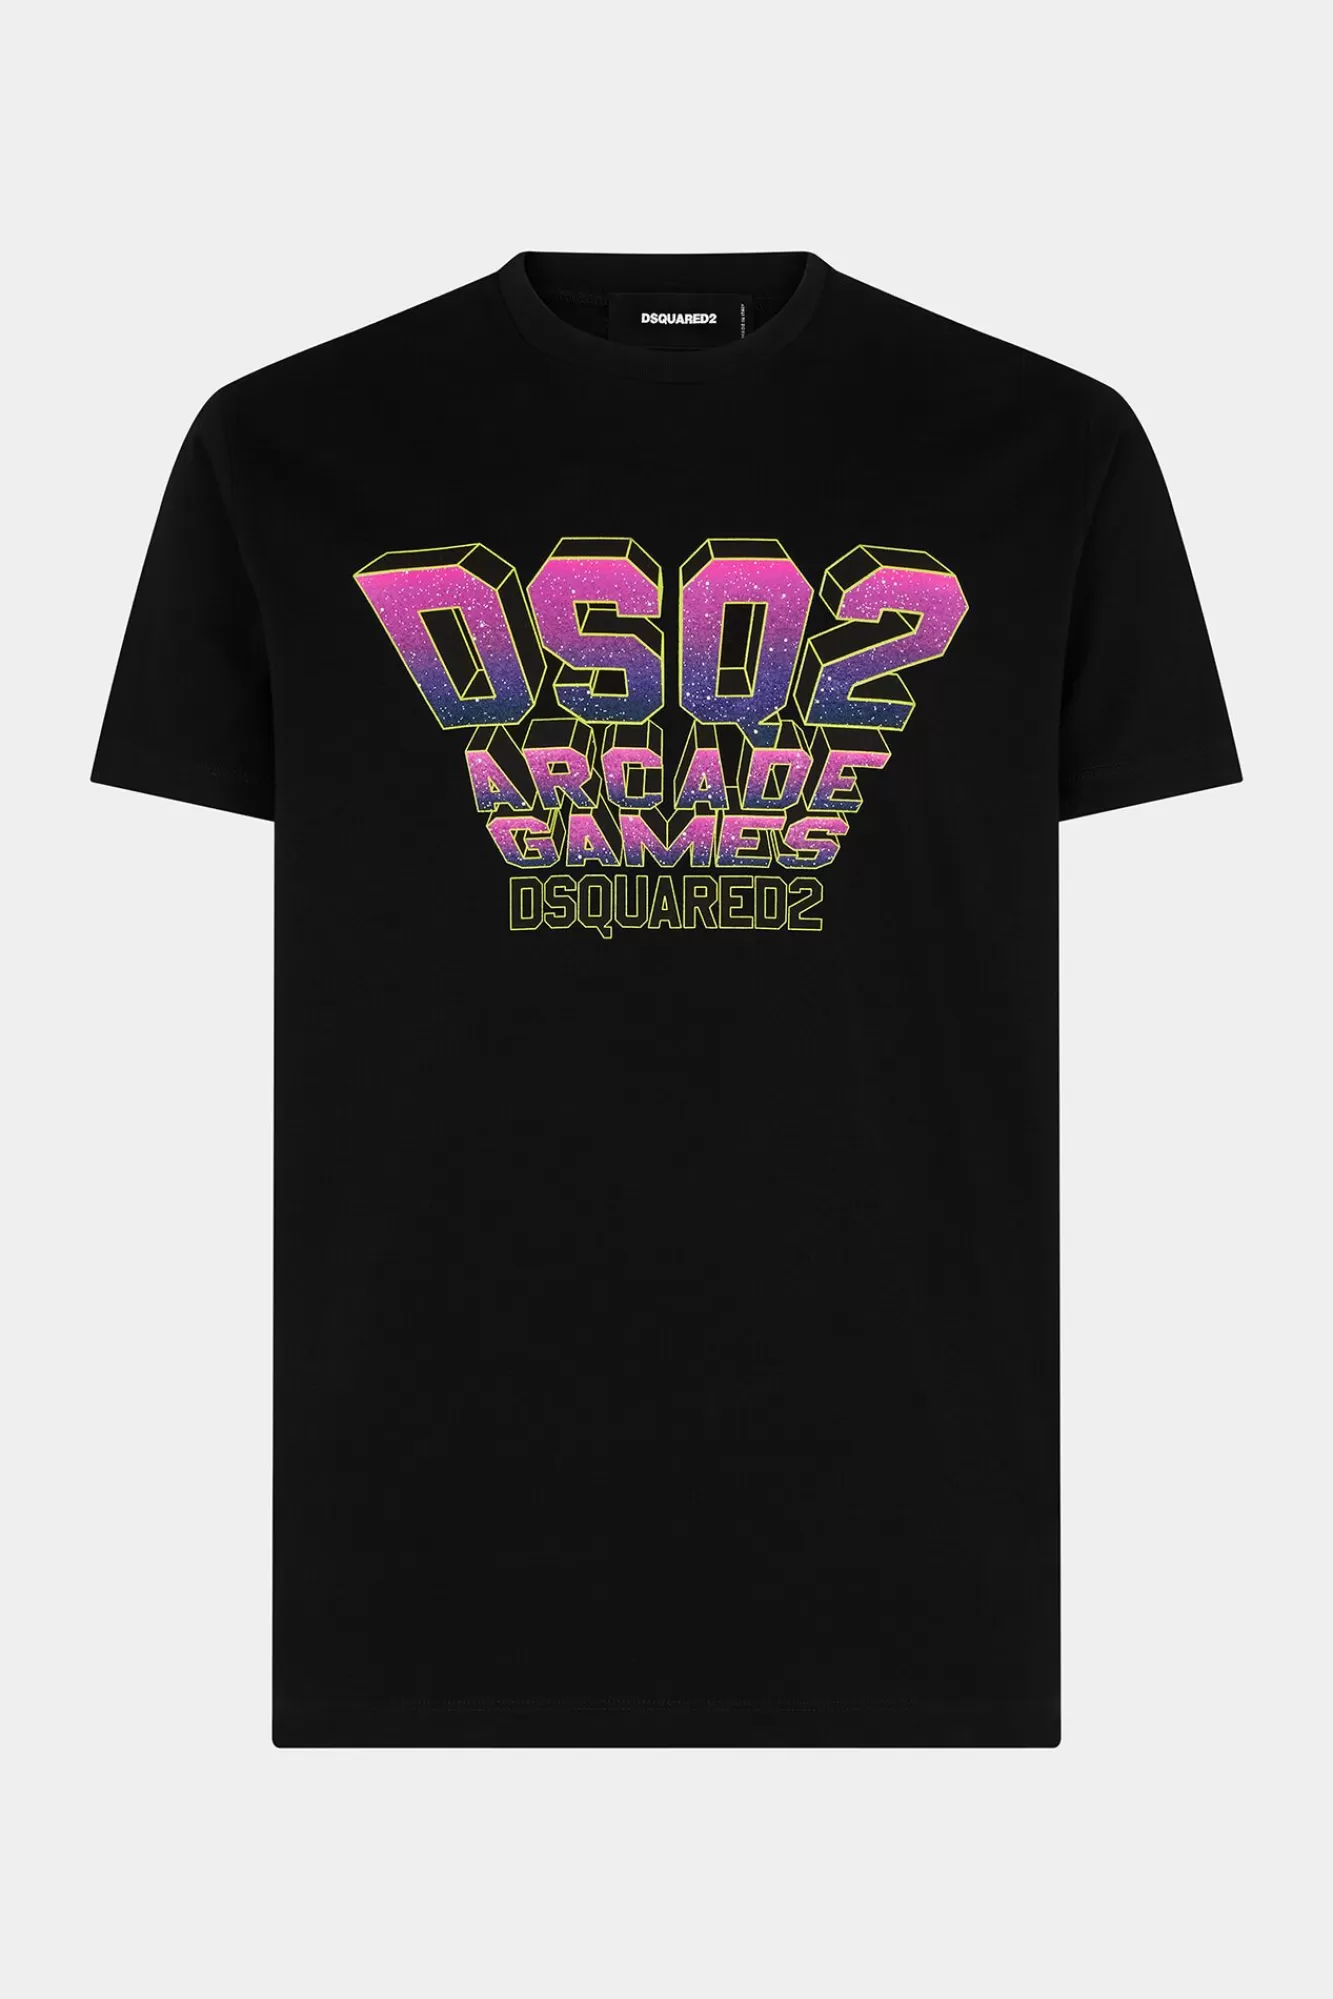 Dsq2 Arcade Games Cool T-Shirt<Dsquared2 Store